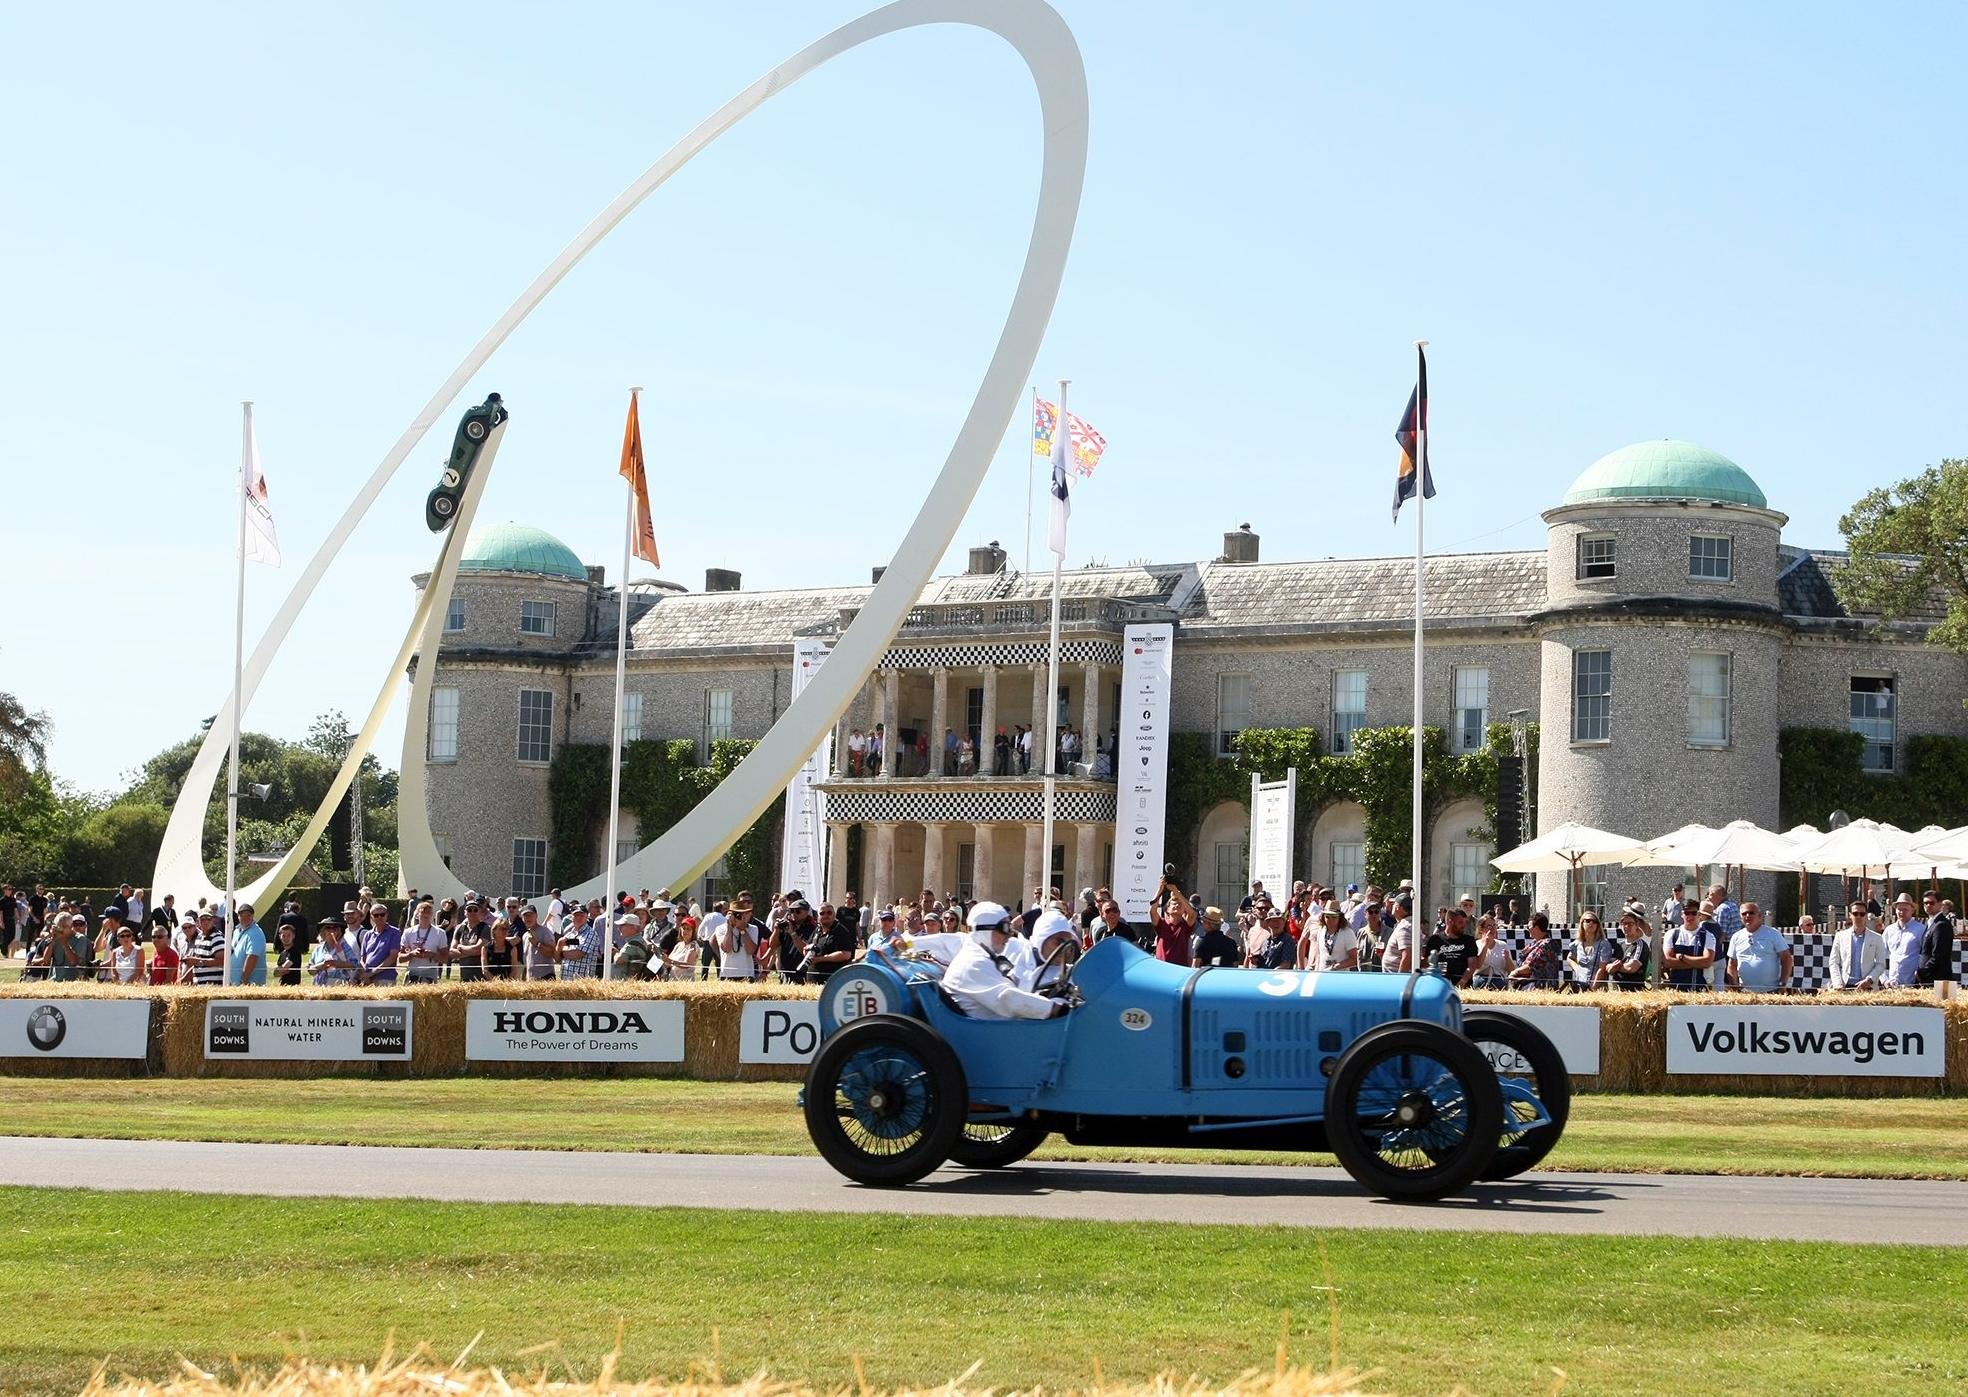 The Festival of Speed returns to Goodwood from July 9-12